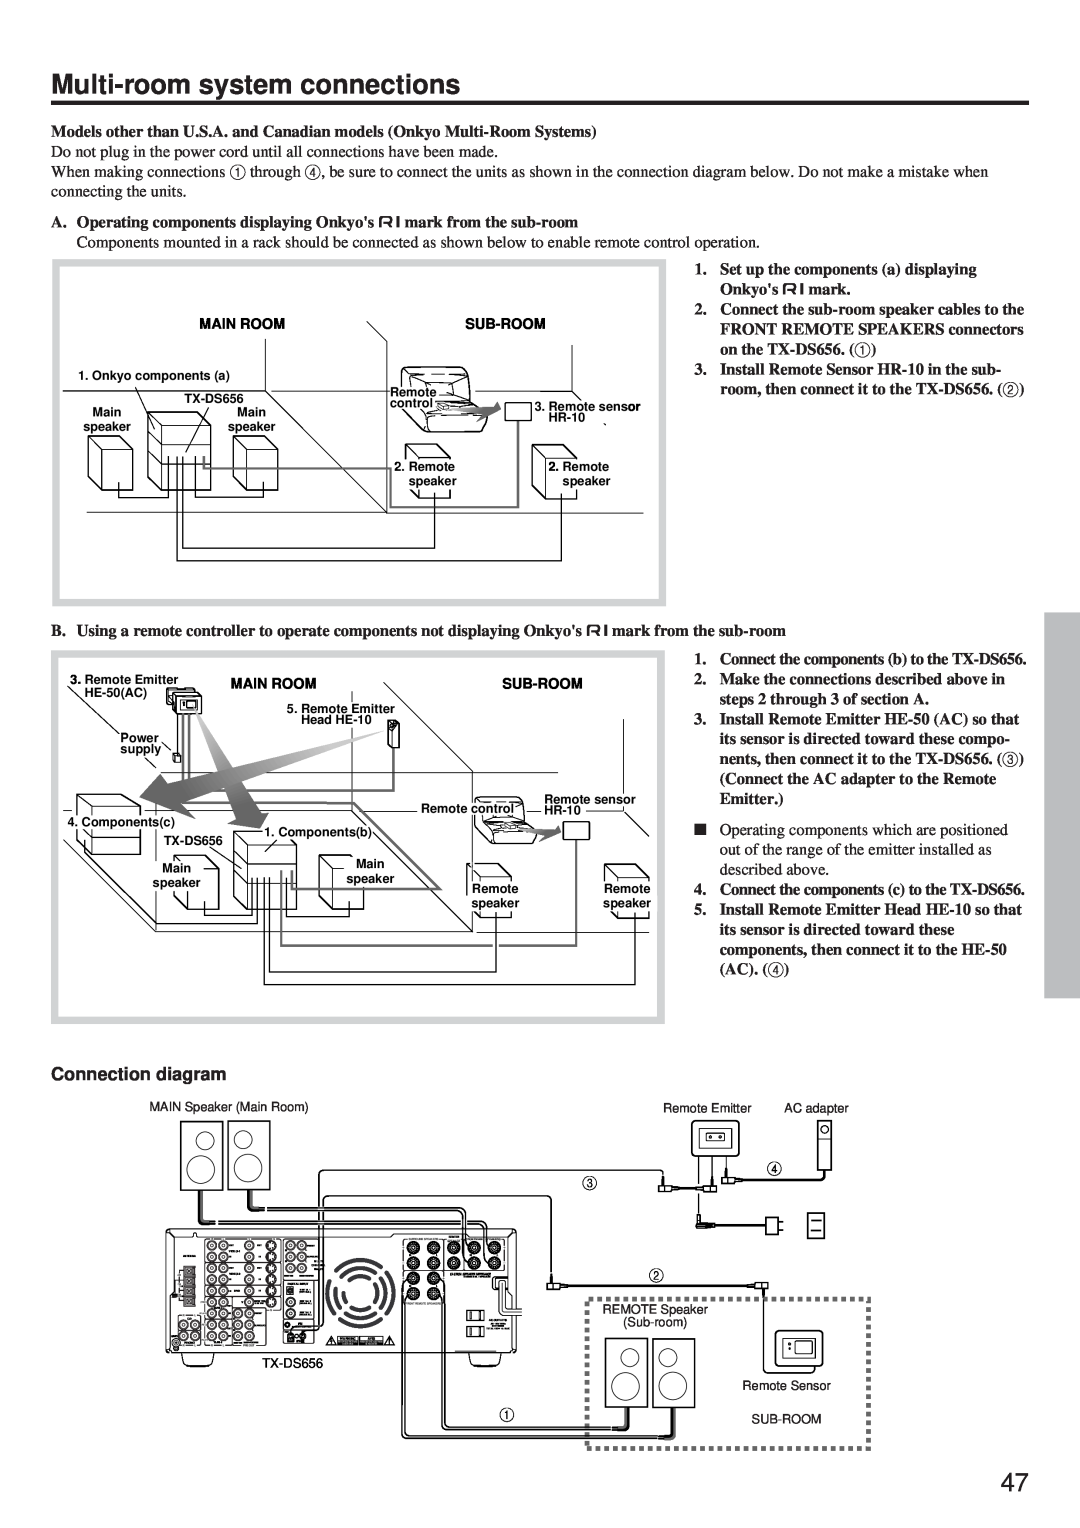 Onkyo TX-DS656 instruction manual Multi-roomsystem connections, Connection diagram 